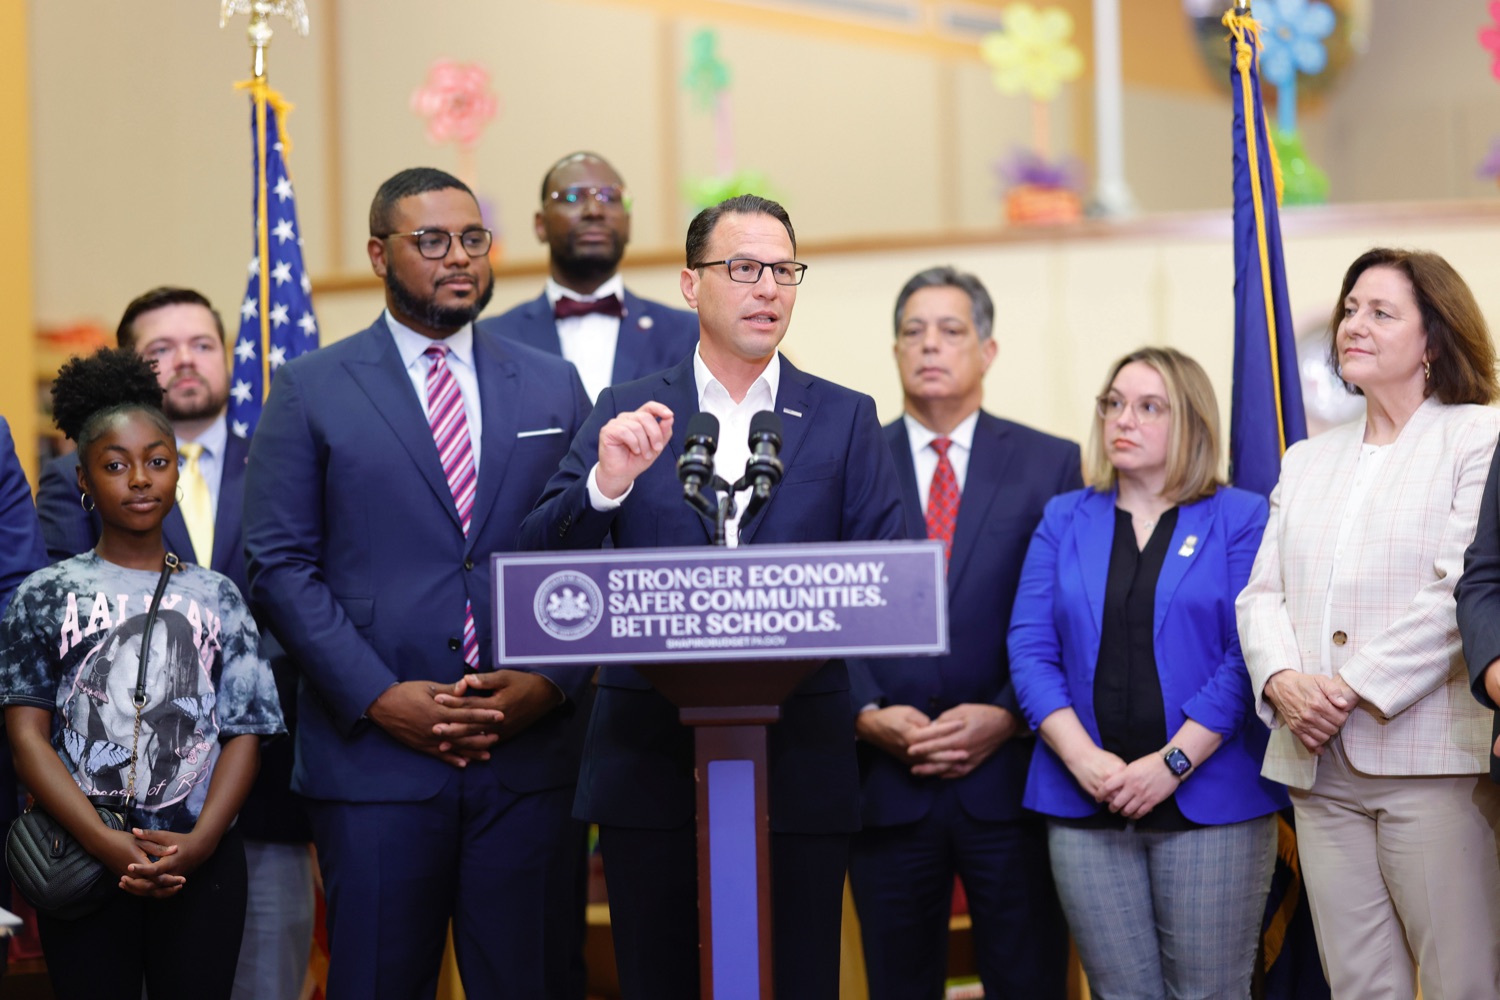 Governor Shapiro Signs Ceremonial Budget Bill Creating Universal Free Breakfast, Making Historic Investments in Public Education During Visit to Allegheny County Elementary School on August 8, 2023.<br><a href="https://filesource.amperwave.net/commonwealthofpa/photo/23563_Gov_Education_DZ_009.JPEG" target="_blank">⇣ Download Photo</a>